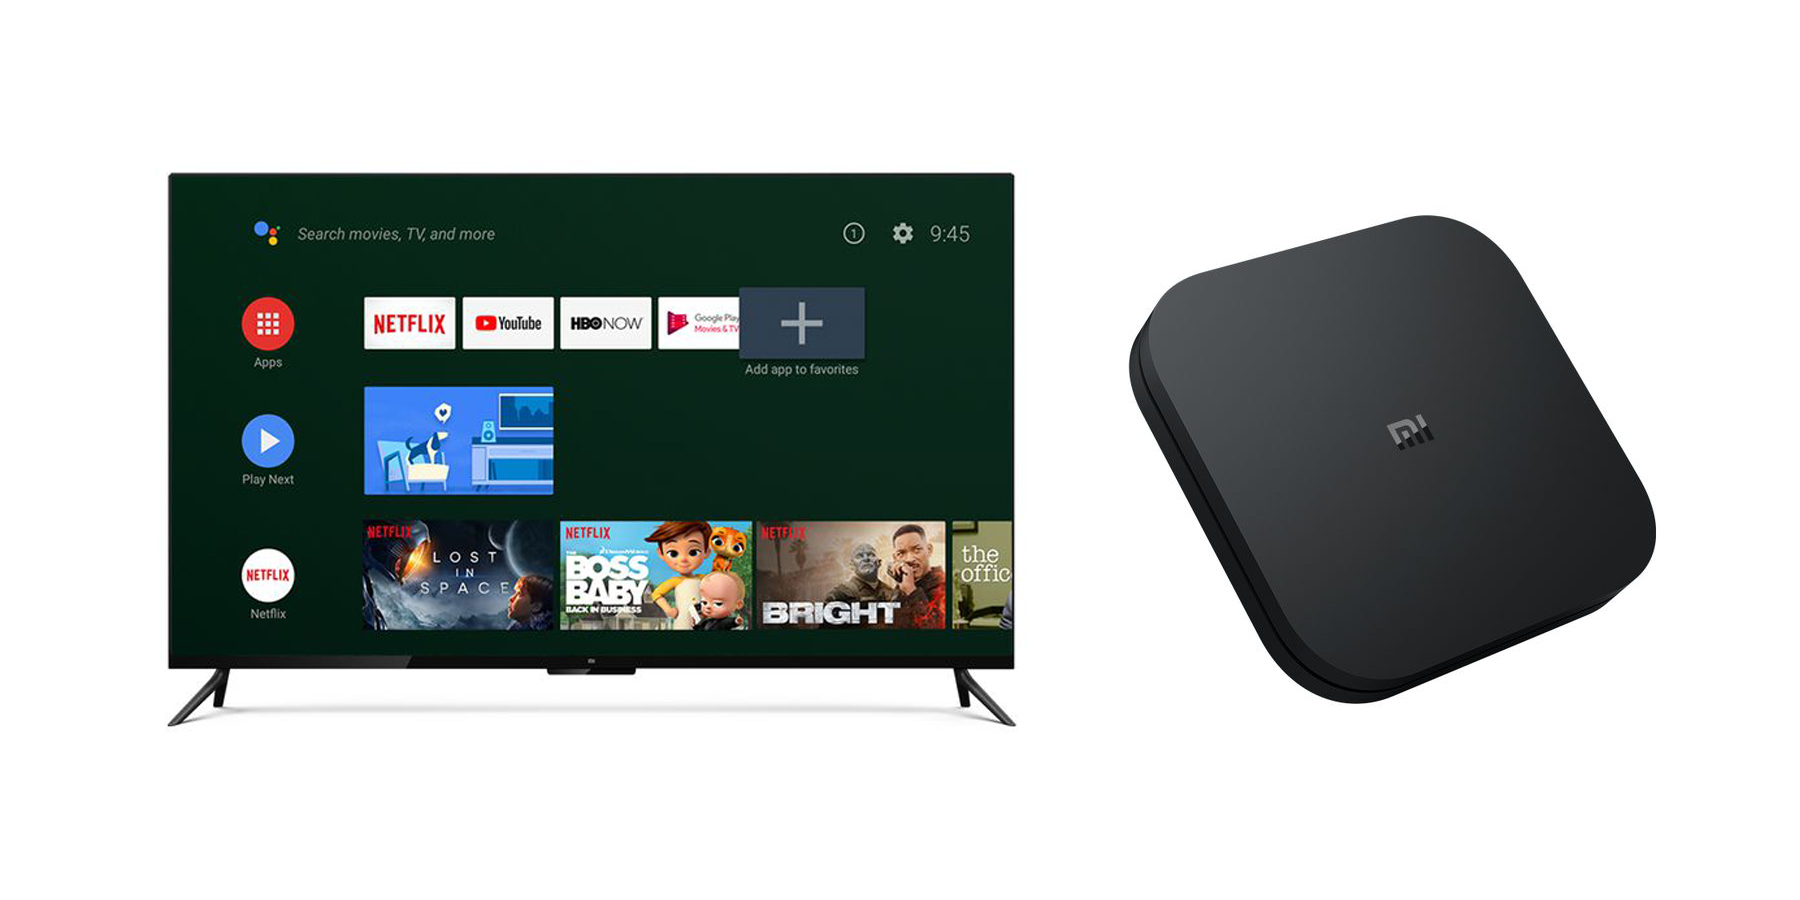 Xiaomi Mi Box S brings Android TV and 4K HDR for 59 9to5Google